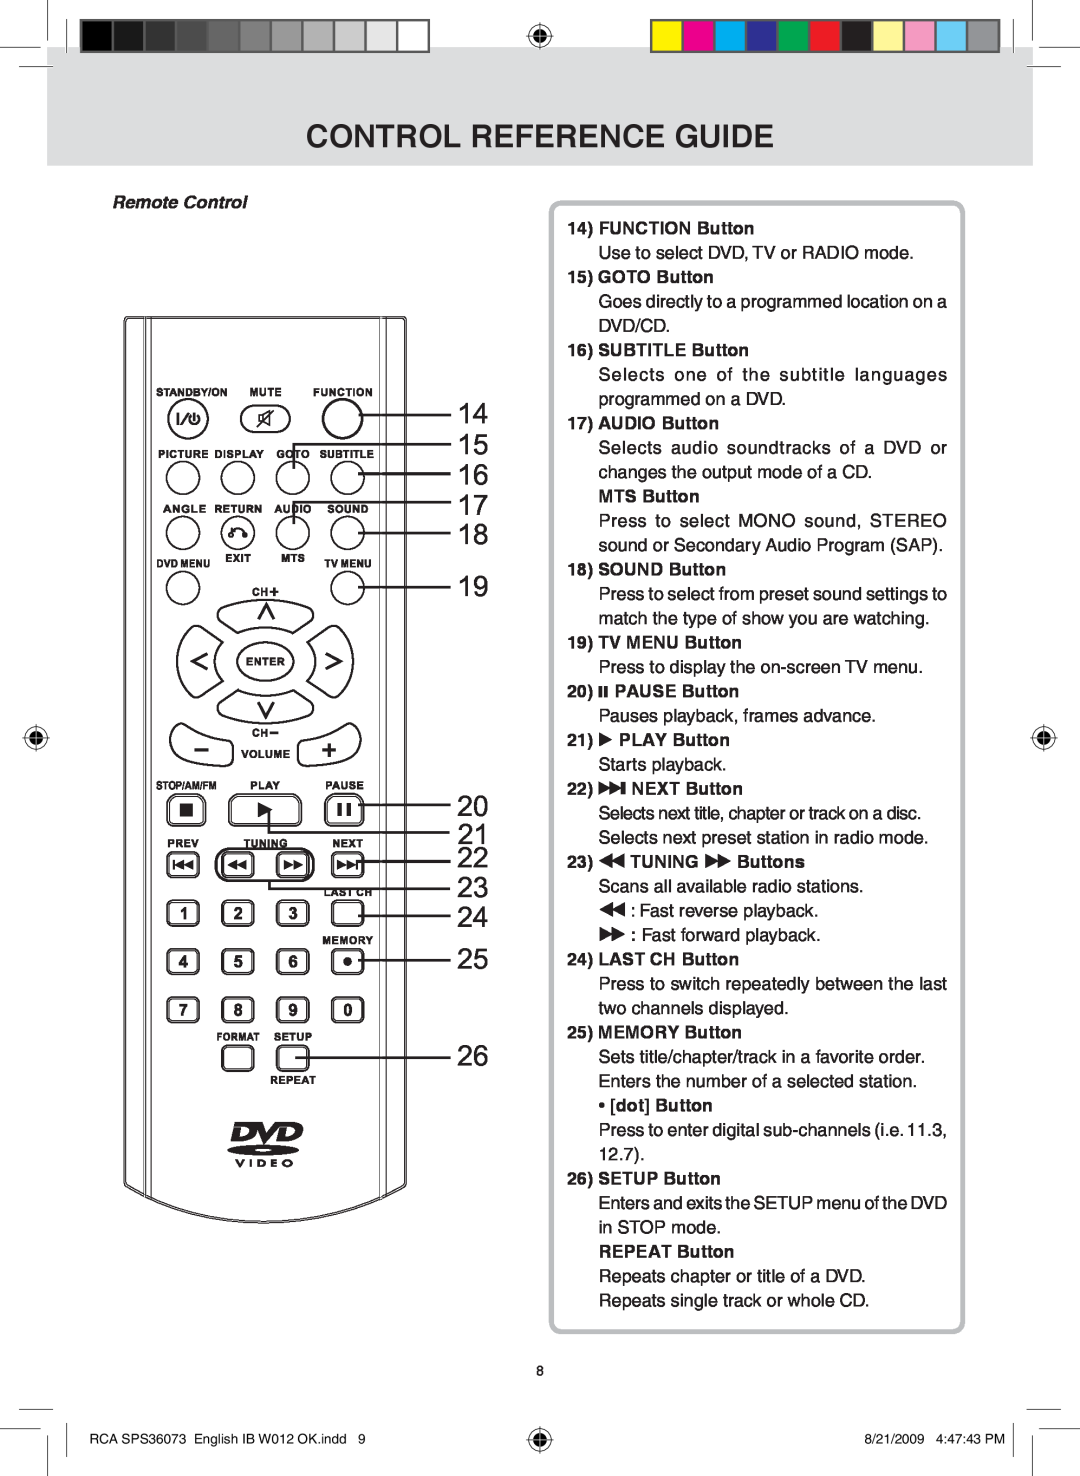 RCA SPS36073 owner manual control reference guide, Remote Control, FUNCTION Button 